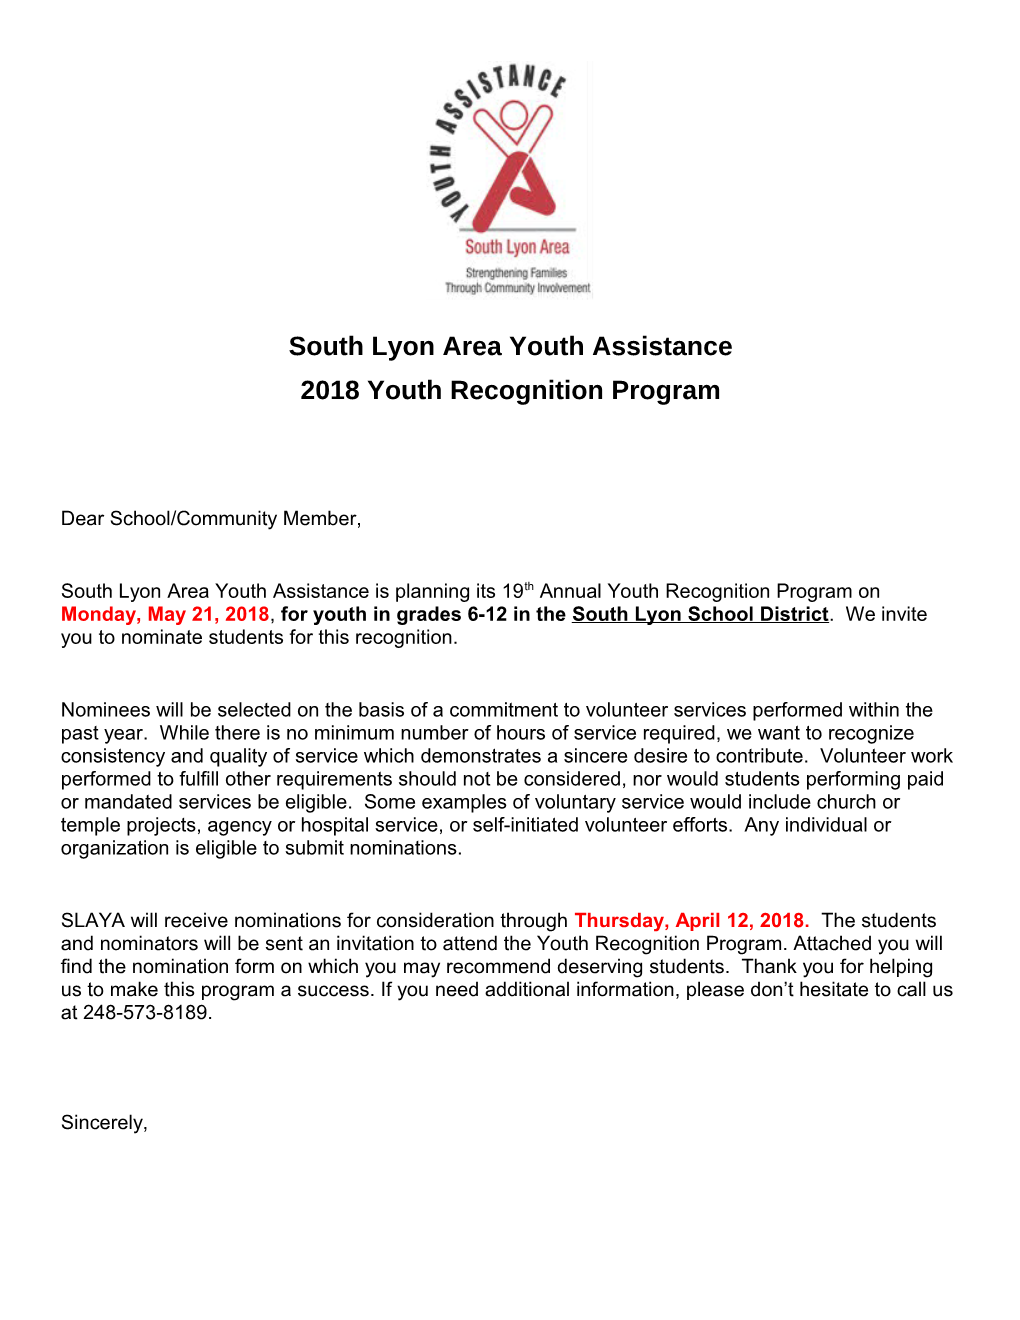 South Lyon Area Youth Assistance